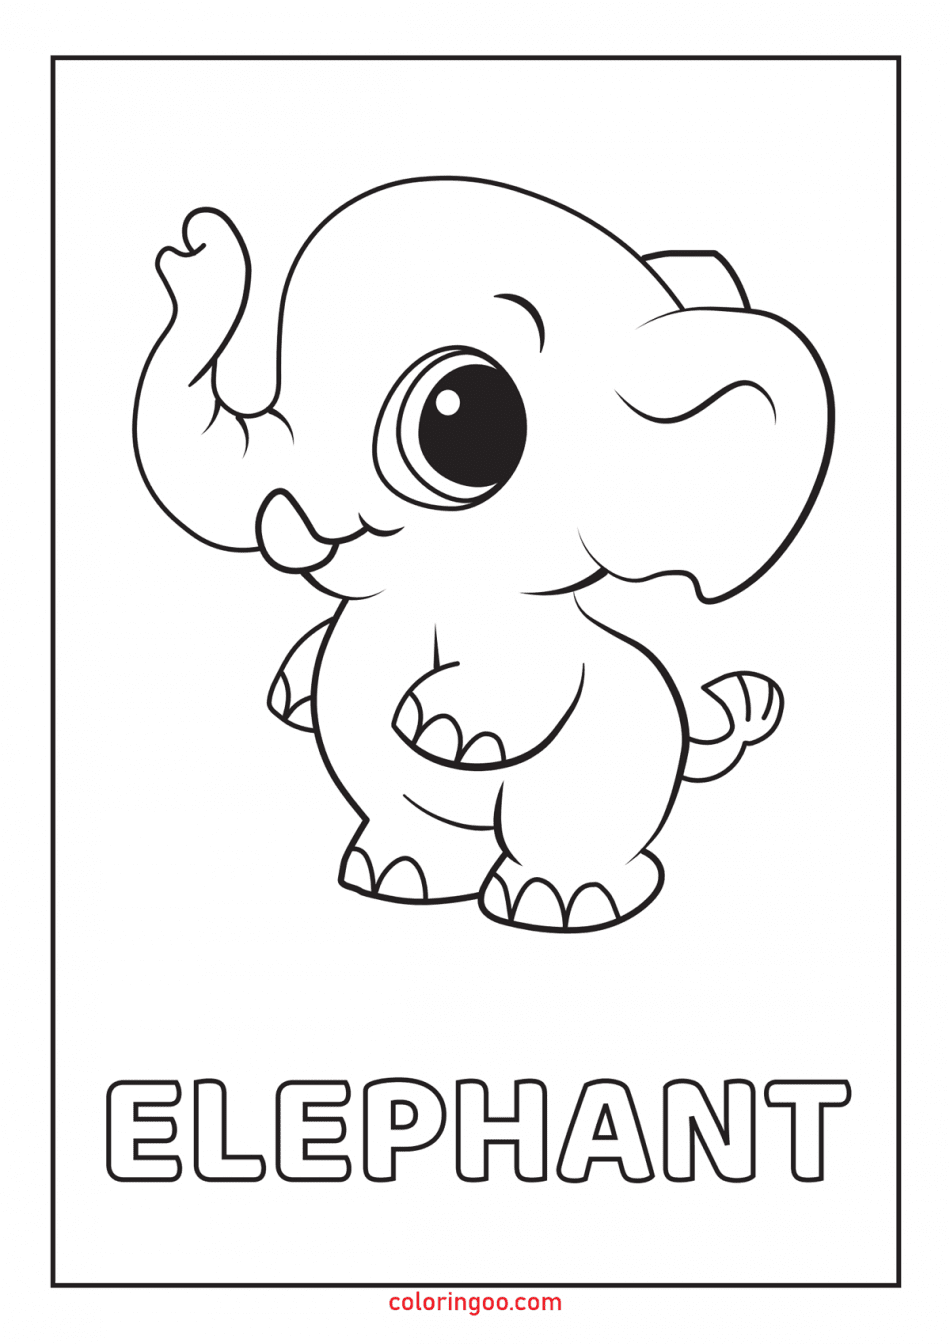 Elephant Printable Coloring Pages for Kids